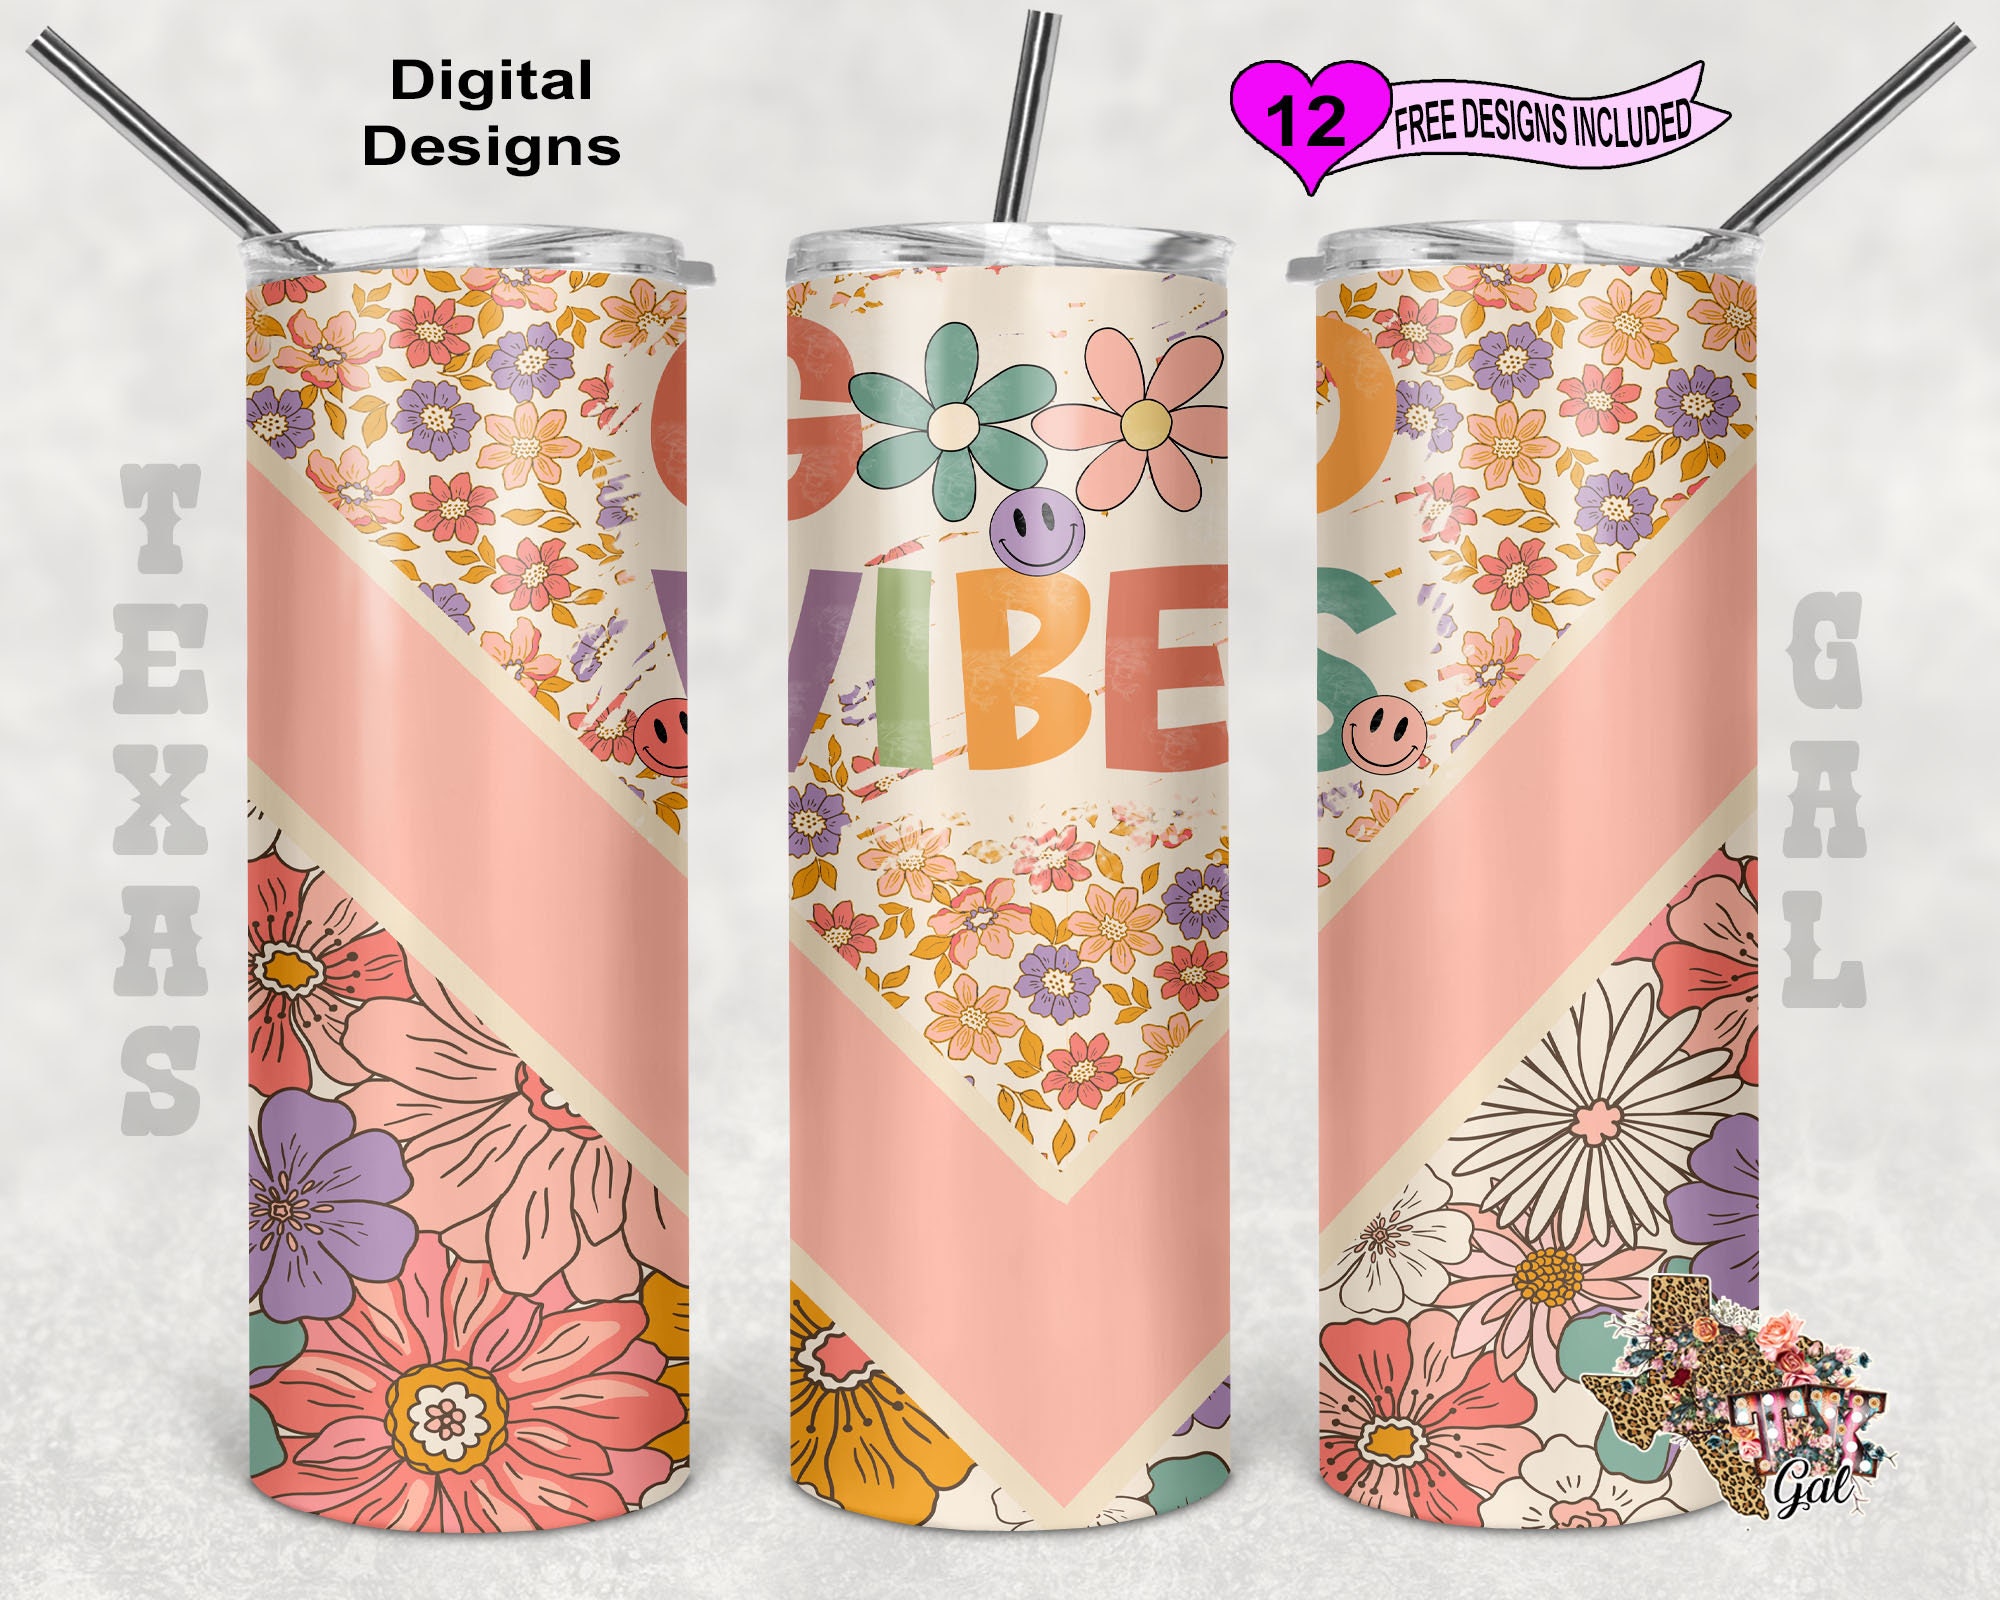 MHM 20oz Glass Sublimation Tumblers Sublimation Glass Tumbler Skinny Frosted 20oz with Bamboo Lid and Straw Sublimation Cups Frosted Glass